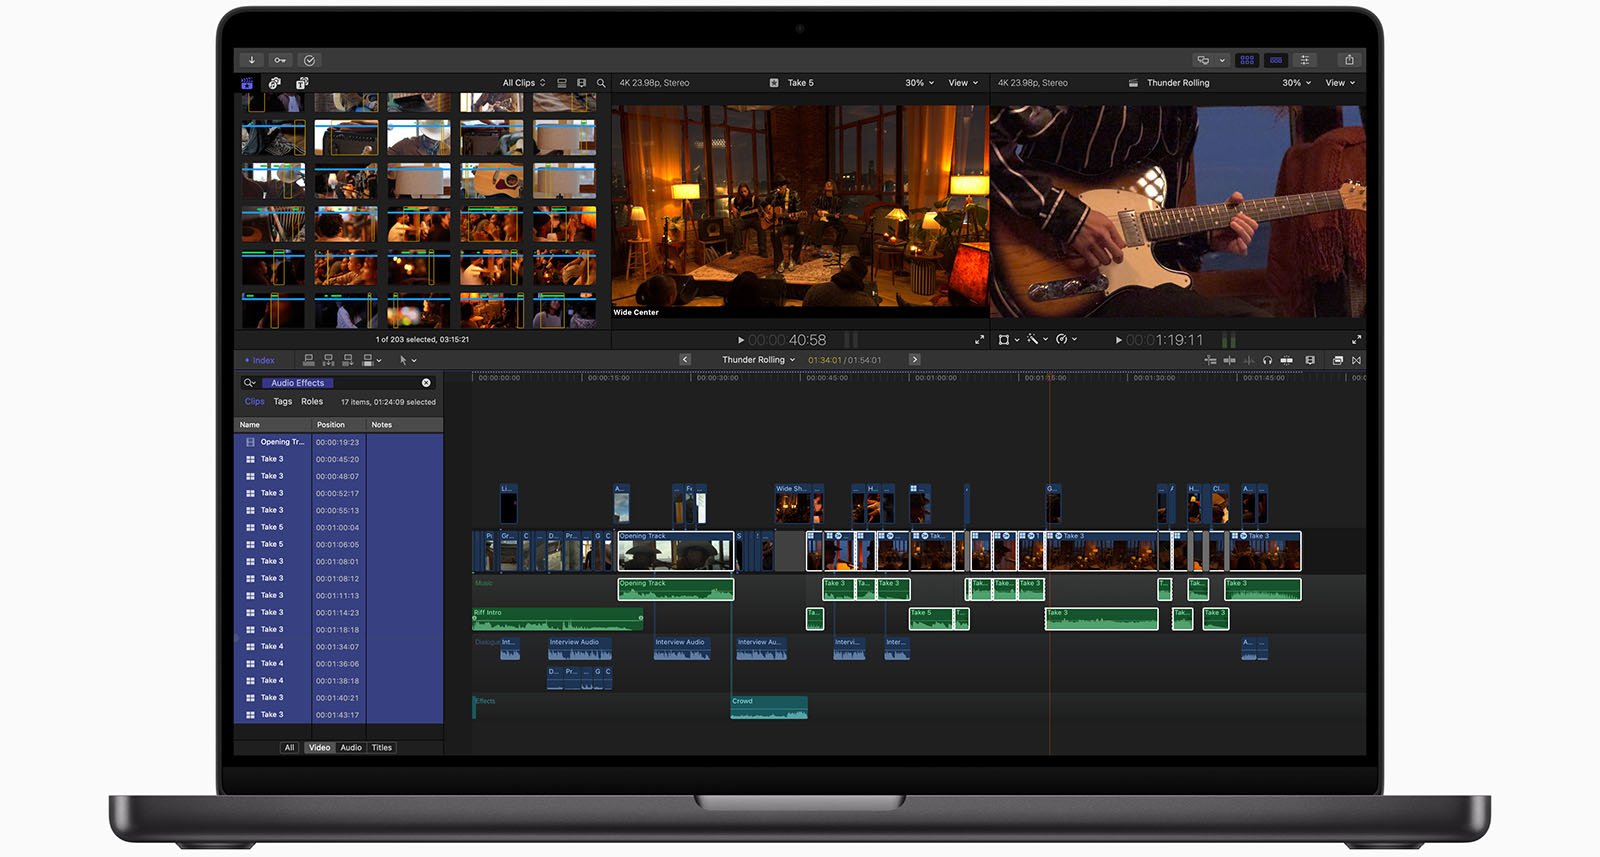 A laptop screen displaying video editing software with multiple video and audio tracks, showing thumbnails of a musician playing guitar in a dimly lit room.